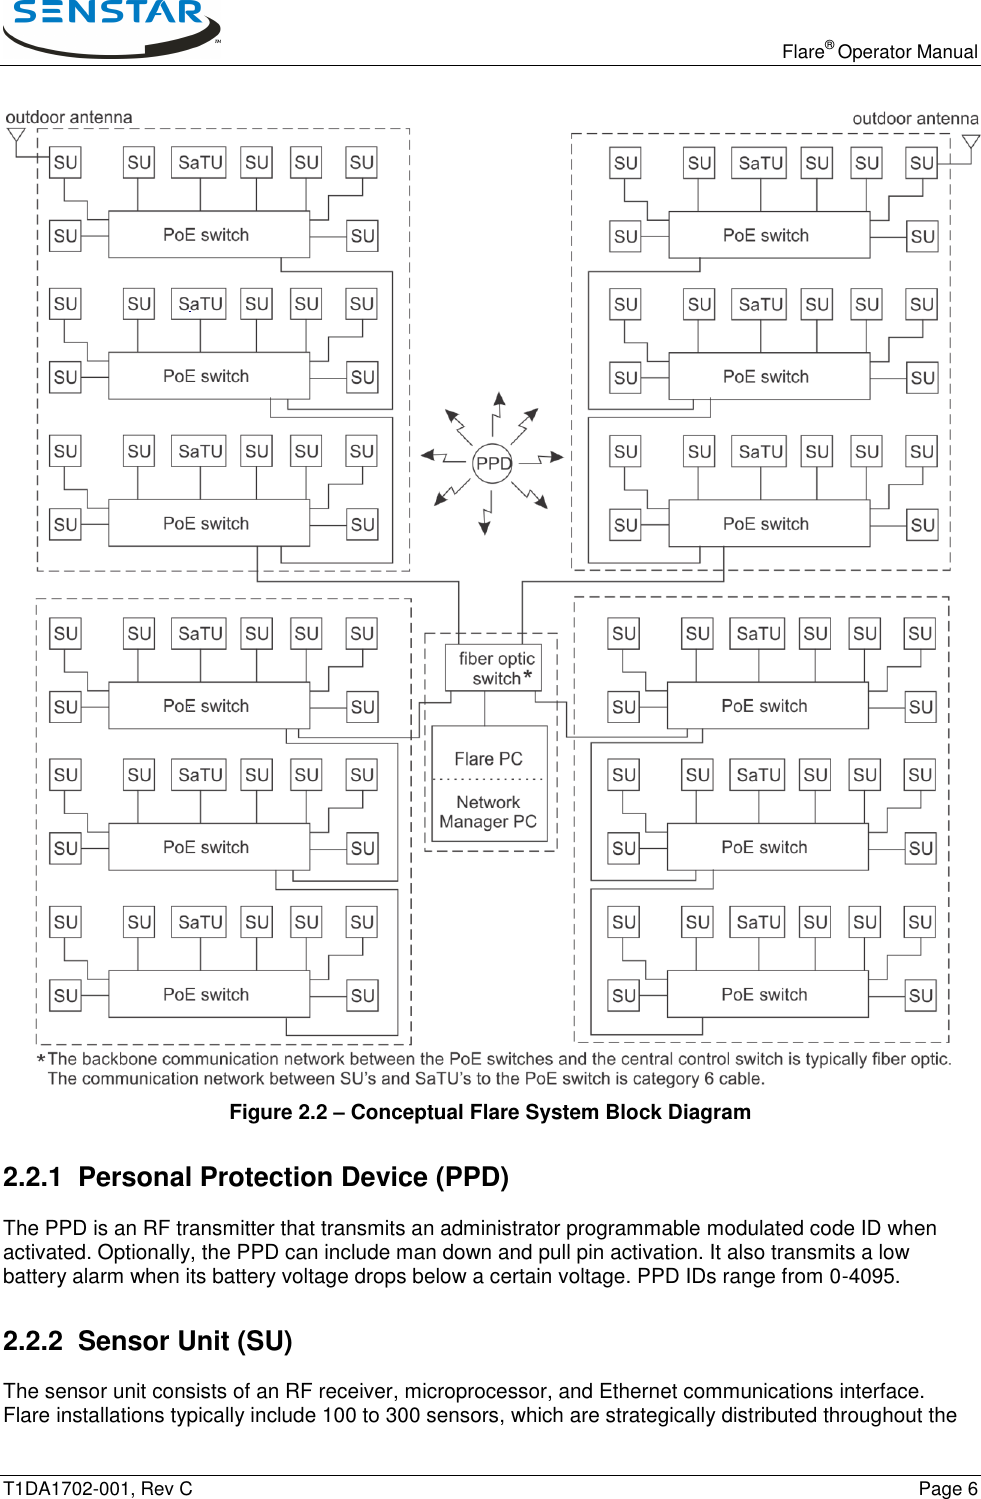   Flare® Operator Manual T1DA1702-001, Rev C    Page 6  Figure 2.2 – Conceptual Flare System Block Diagram 2.2.1  Personal Protection Device (PPD) The PPD is an RF transmitter that transmits an administrator programmable modulated code ID when activated. Optionally, the PPD can include man down and pull pin activation. It also transmits a low battery alarm when its battery voltage drops below a certain voltage. PPD IDs range from 0-4095. 2.2.2 Sensor Unit (SU) The sensor unit consists of an RF receiver, microprocessor, and Ethernet communications interface. Flare installations typically include 100 to 300 sensors, which are strategically distributed throughout the 